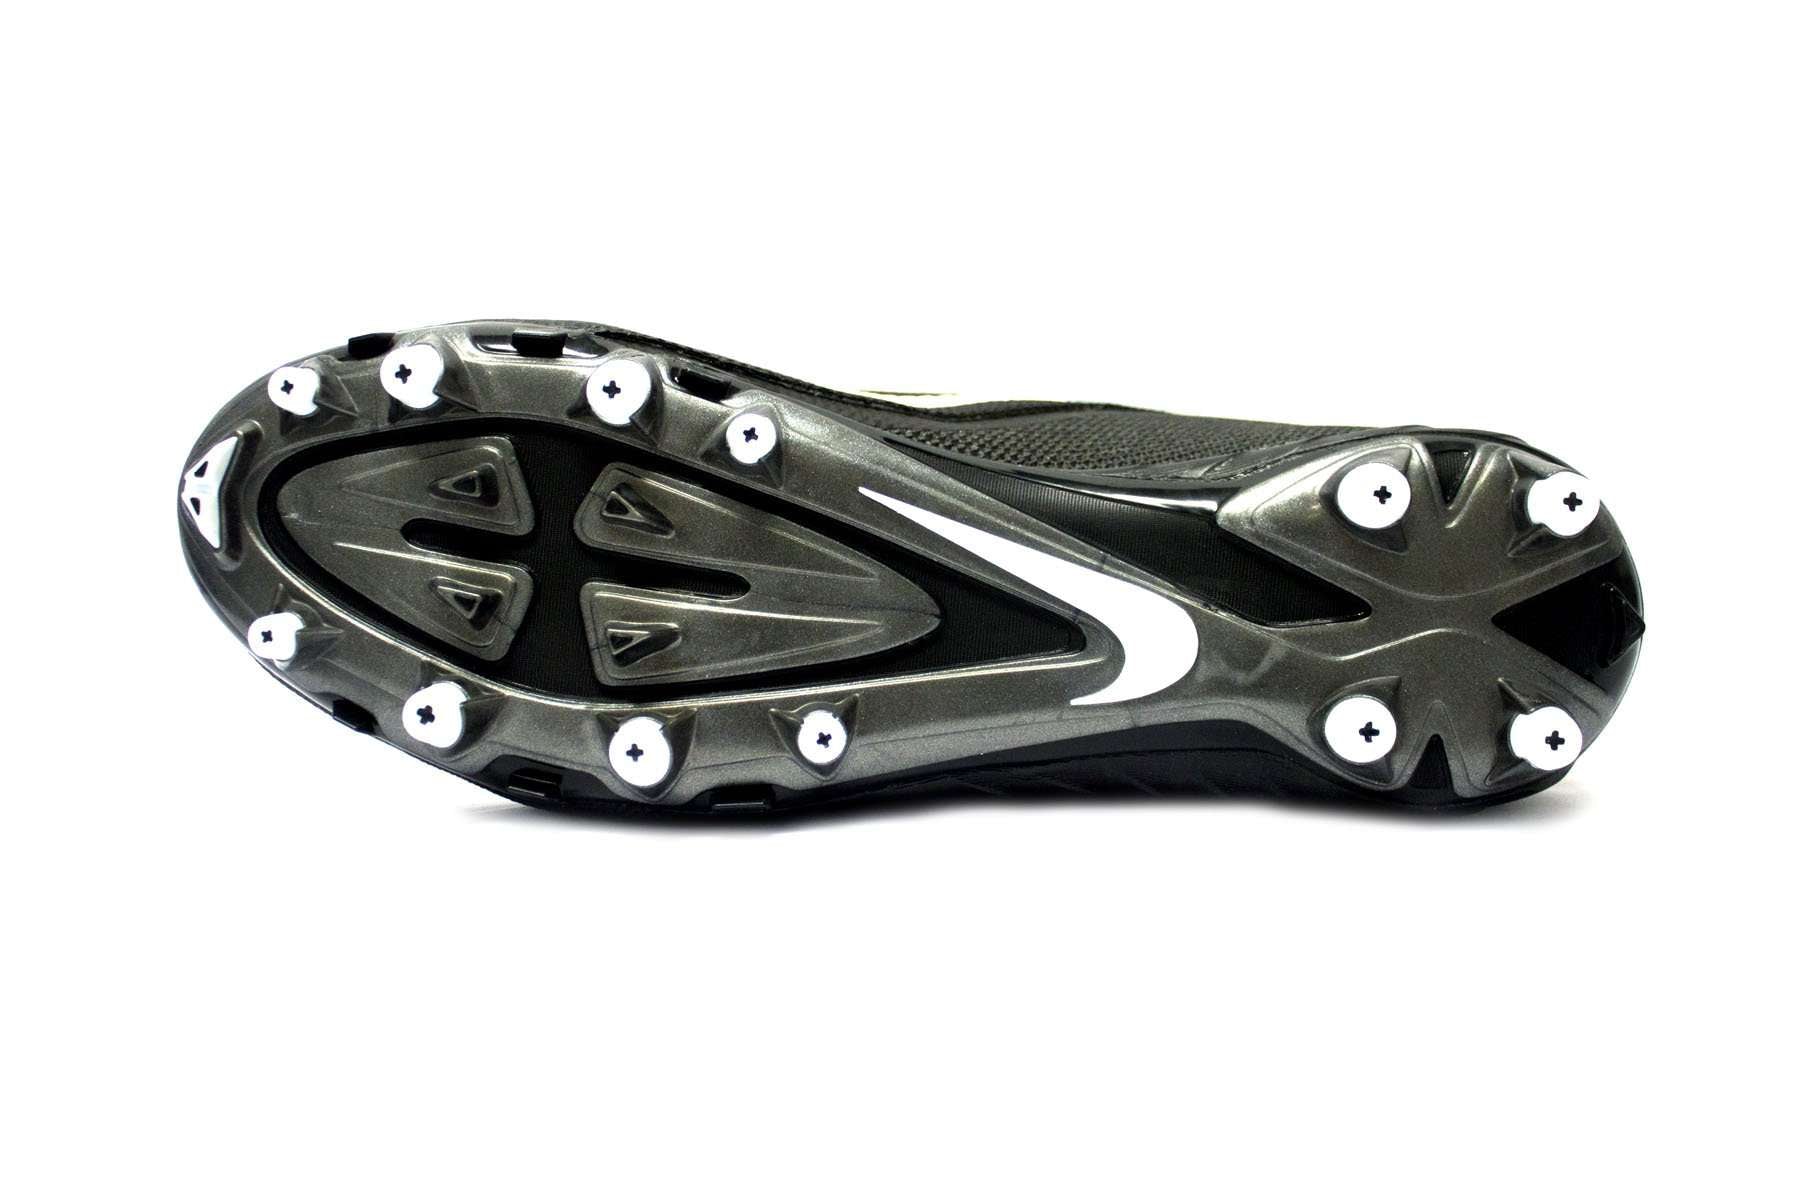 bottom of a football cleat